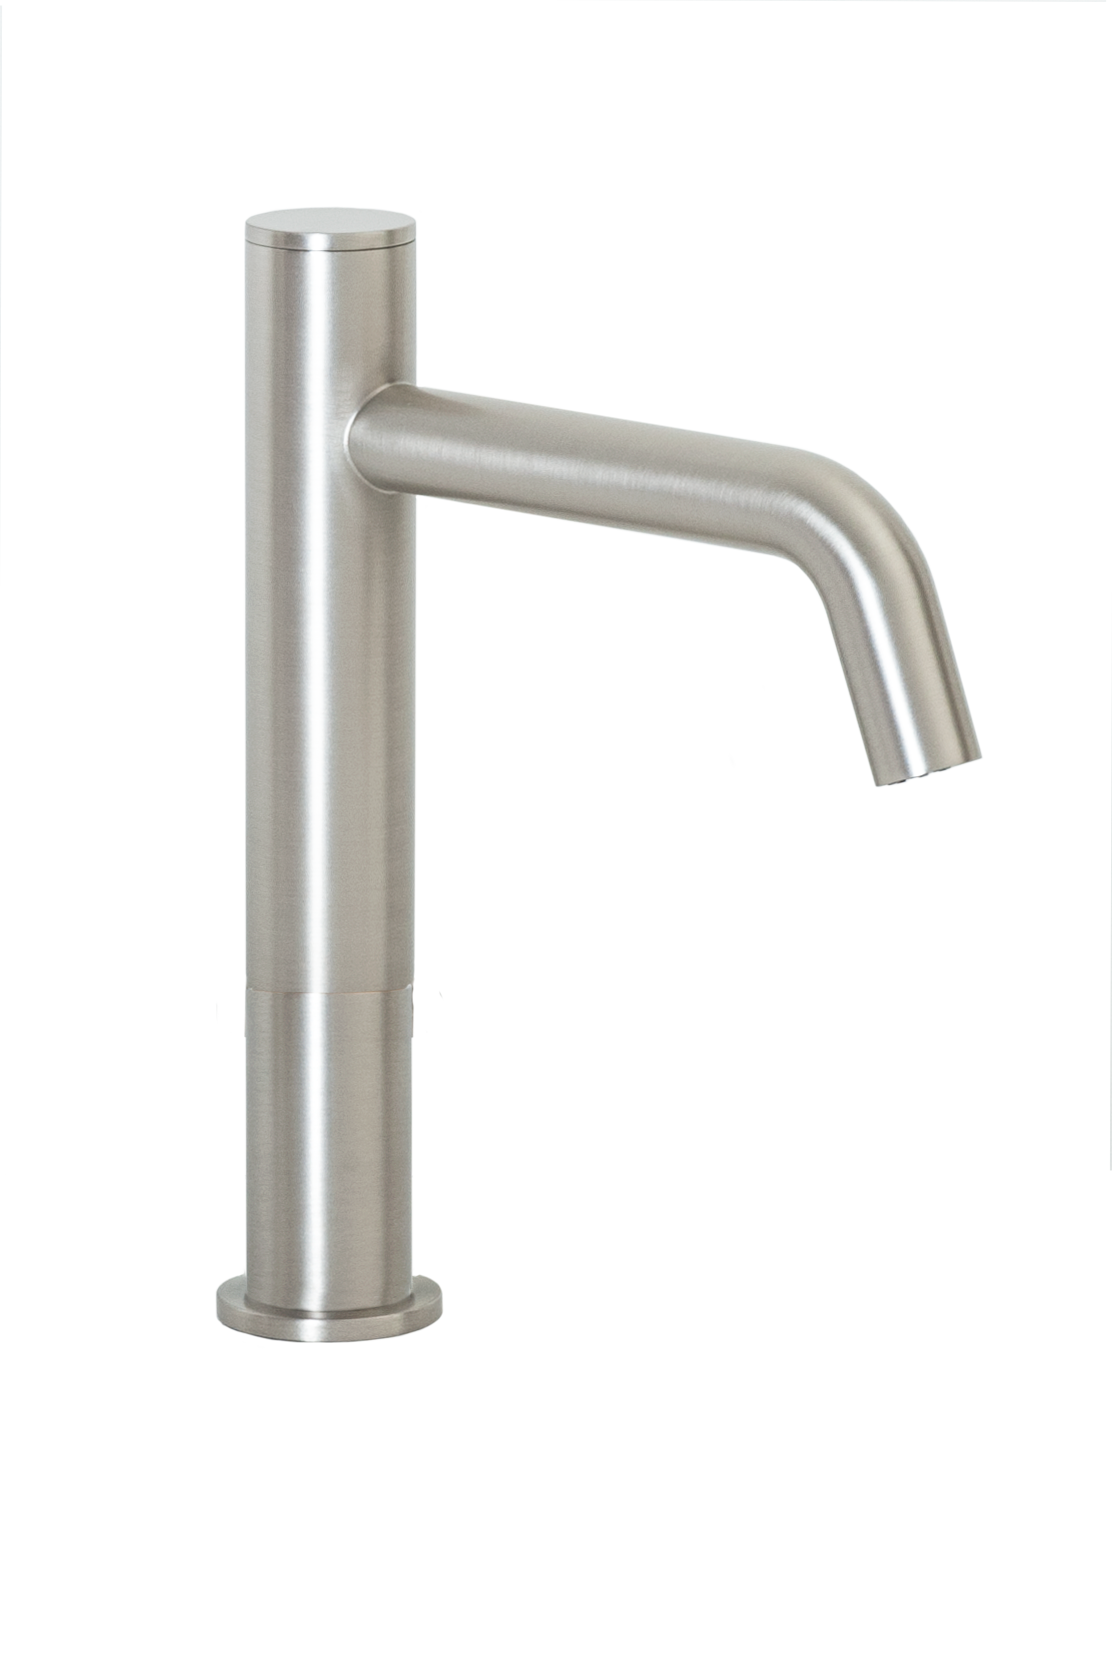 FA-3283 Automatic Faucet with 8” Spout Reach and 3” Riser In Satin Nickel